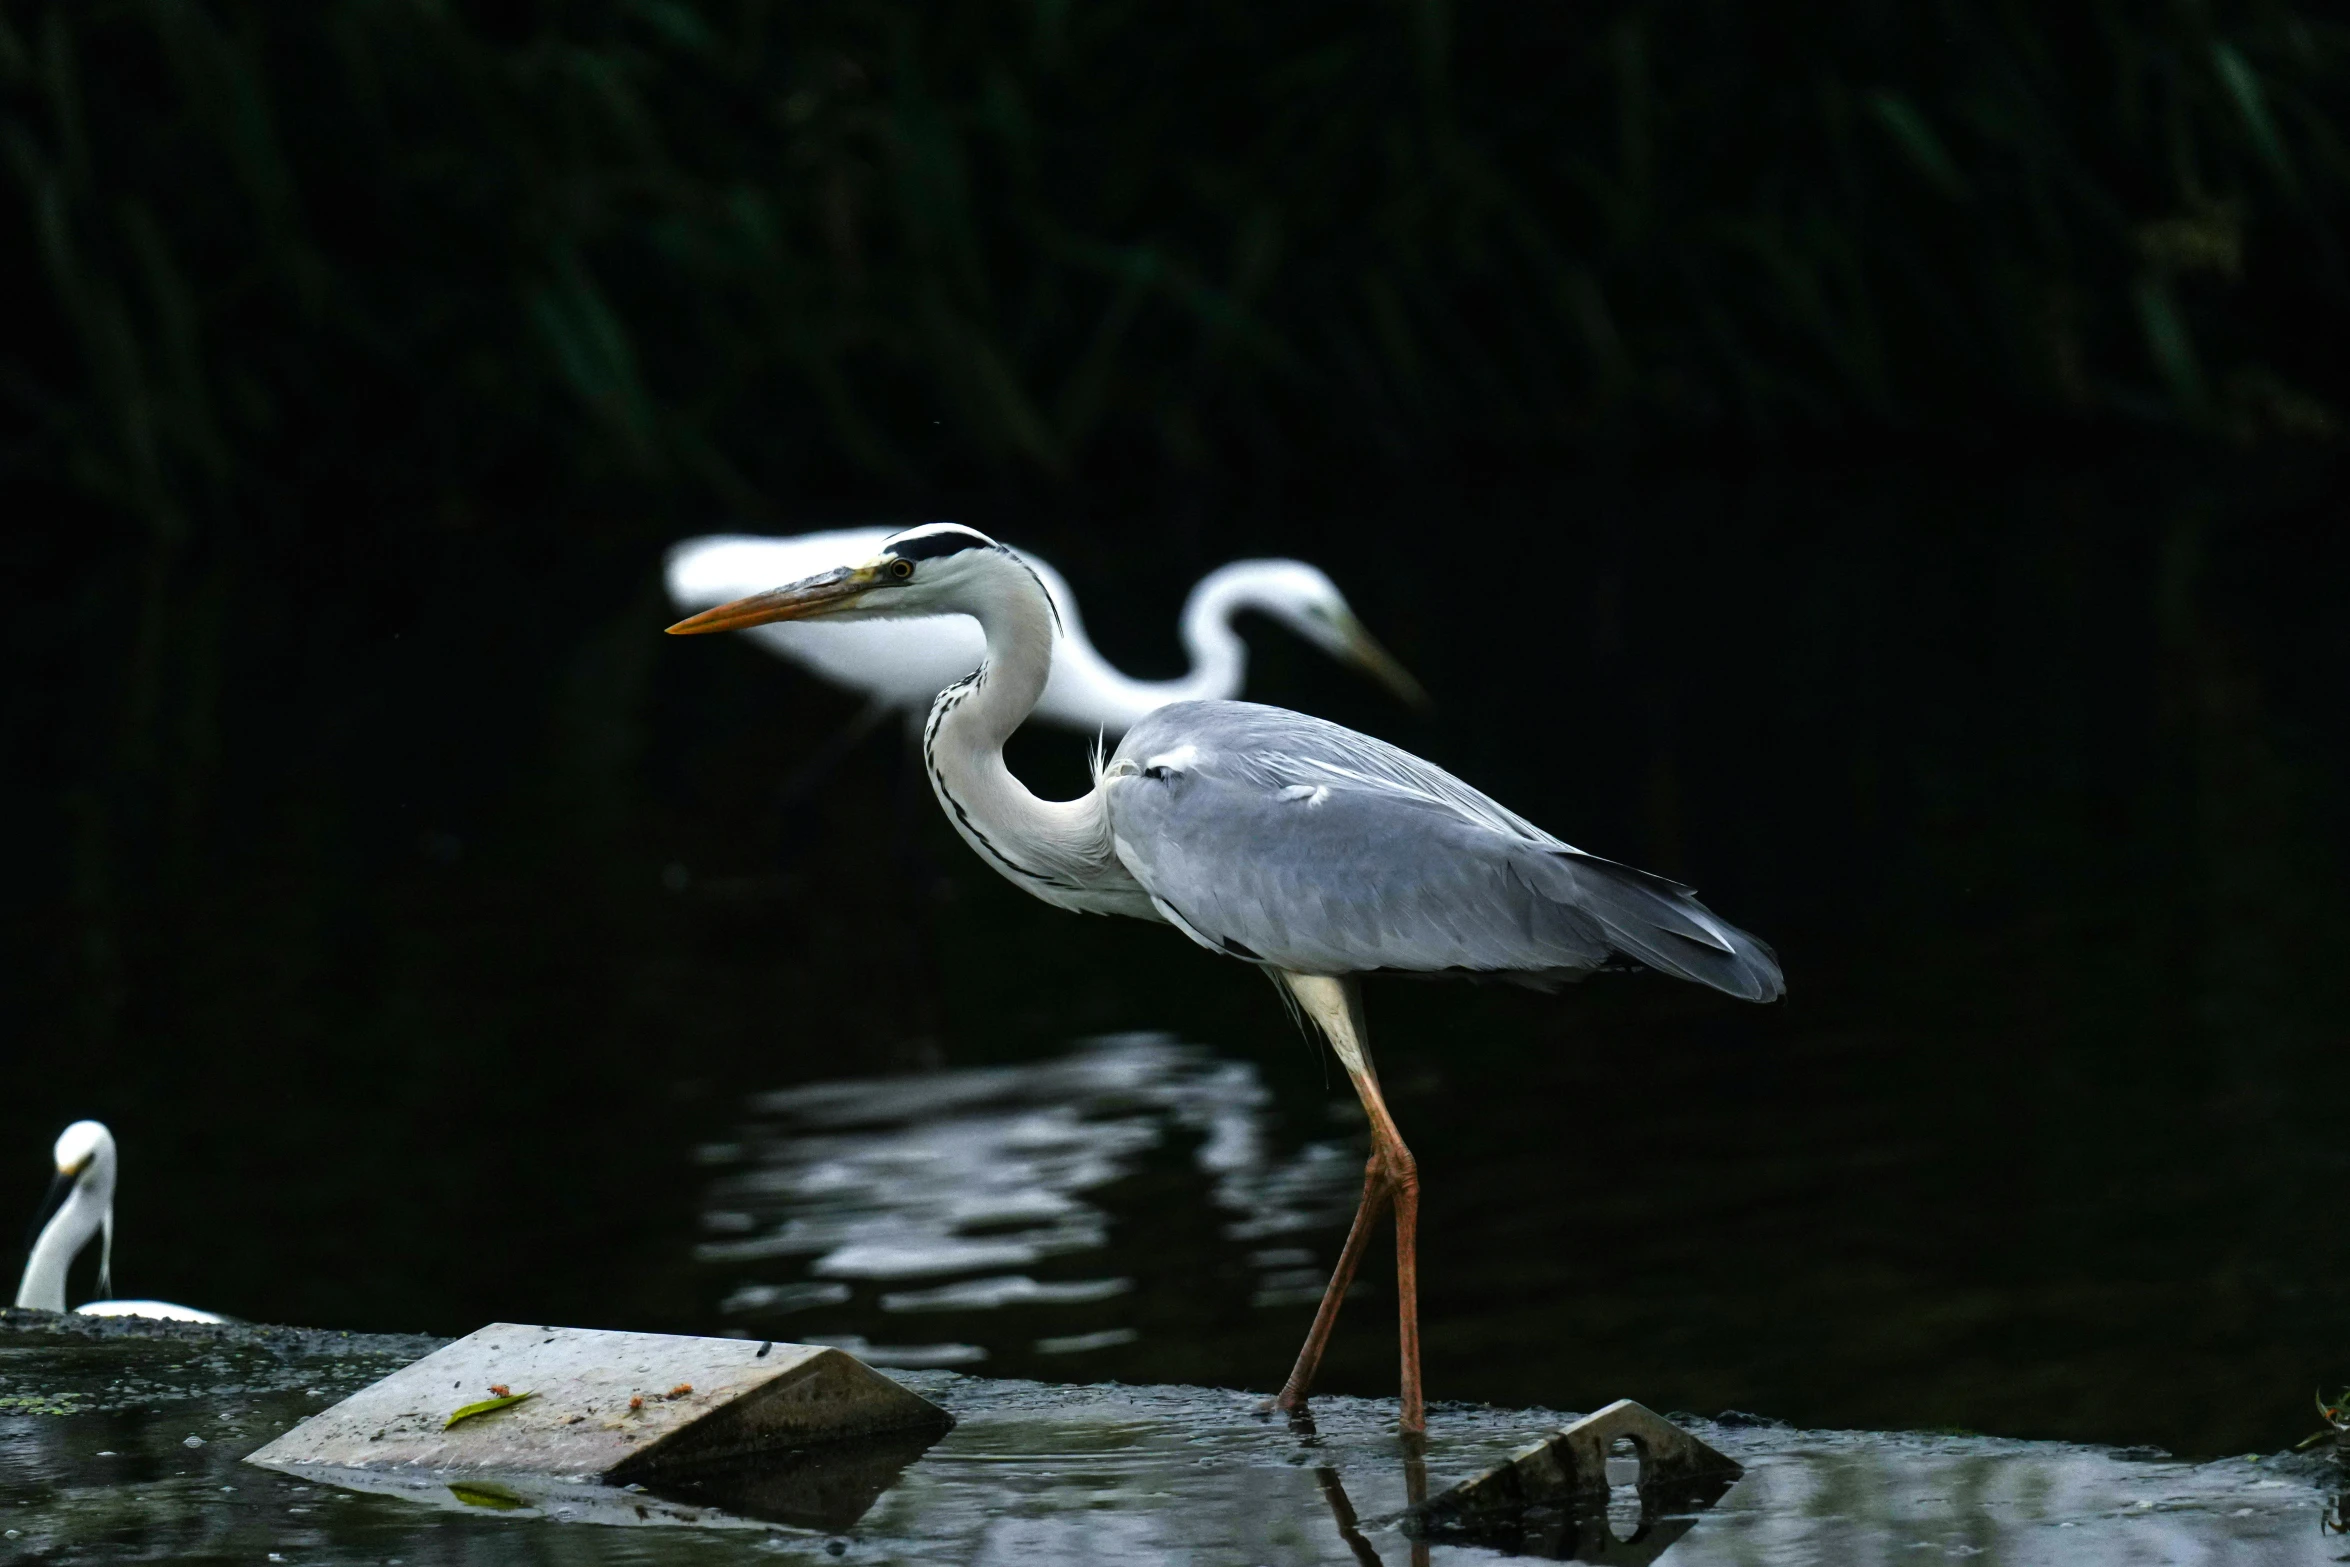 a grey heron standing in the water and several white egrets looking on